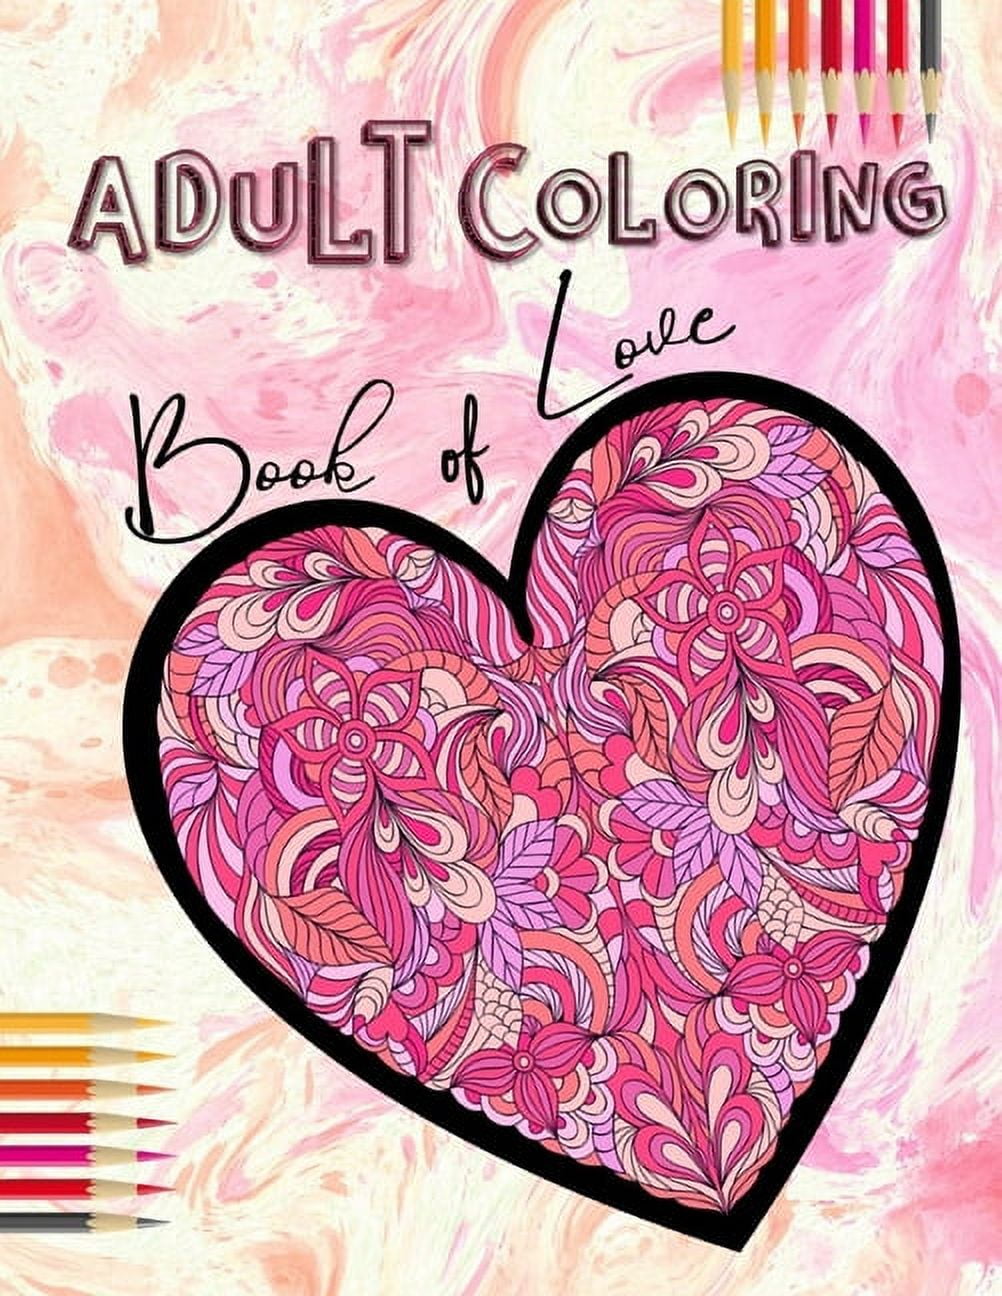 Adult coloring book of love be my valentine hearts and flowers mandalas words of love and romantic designs to color paperback